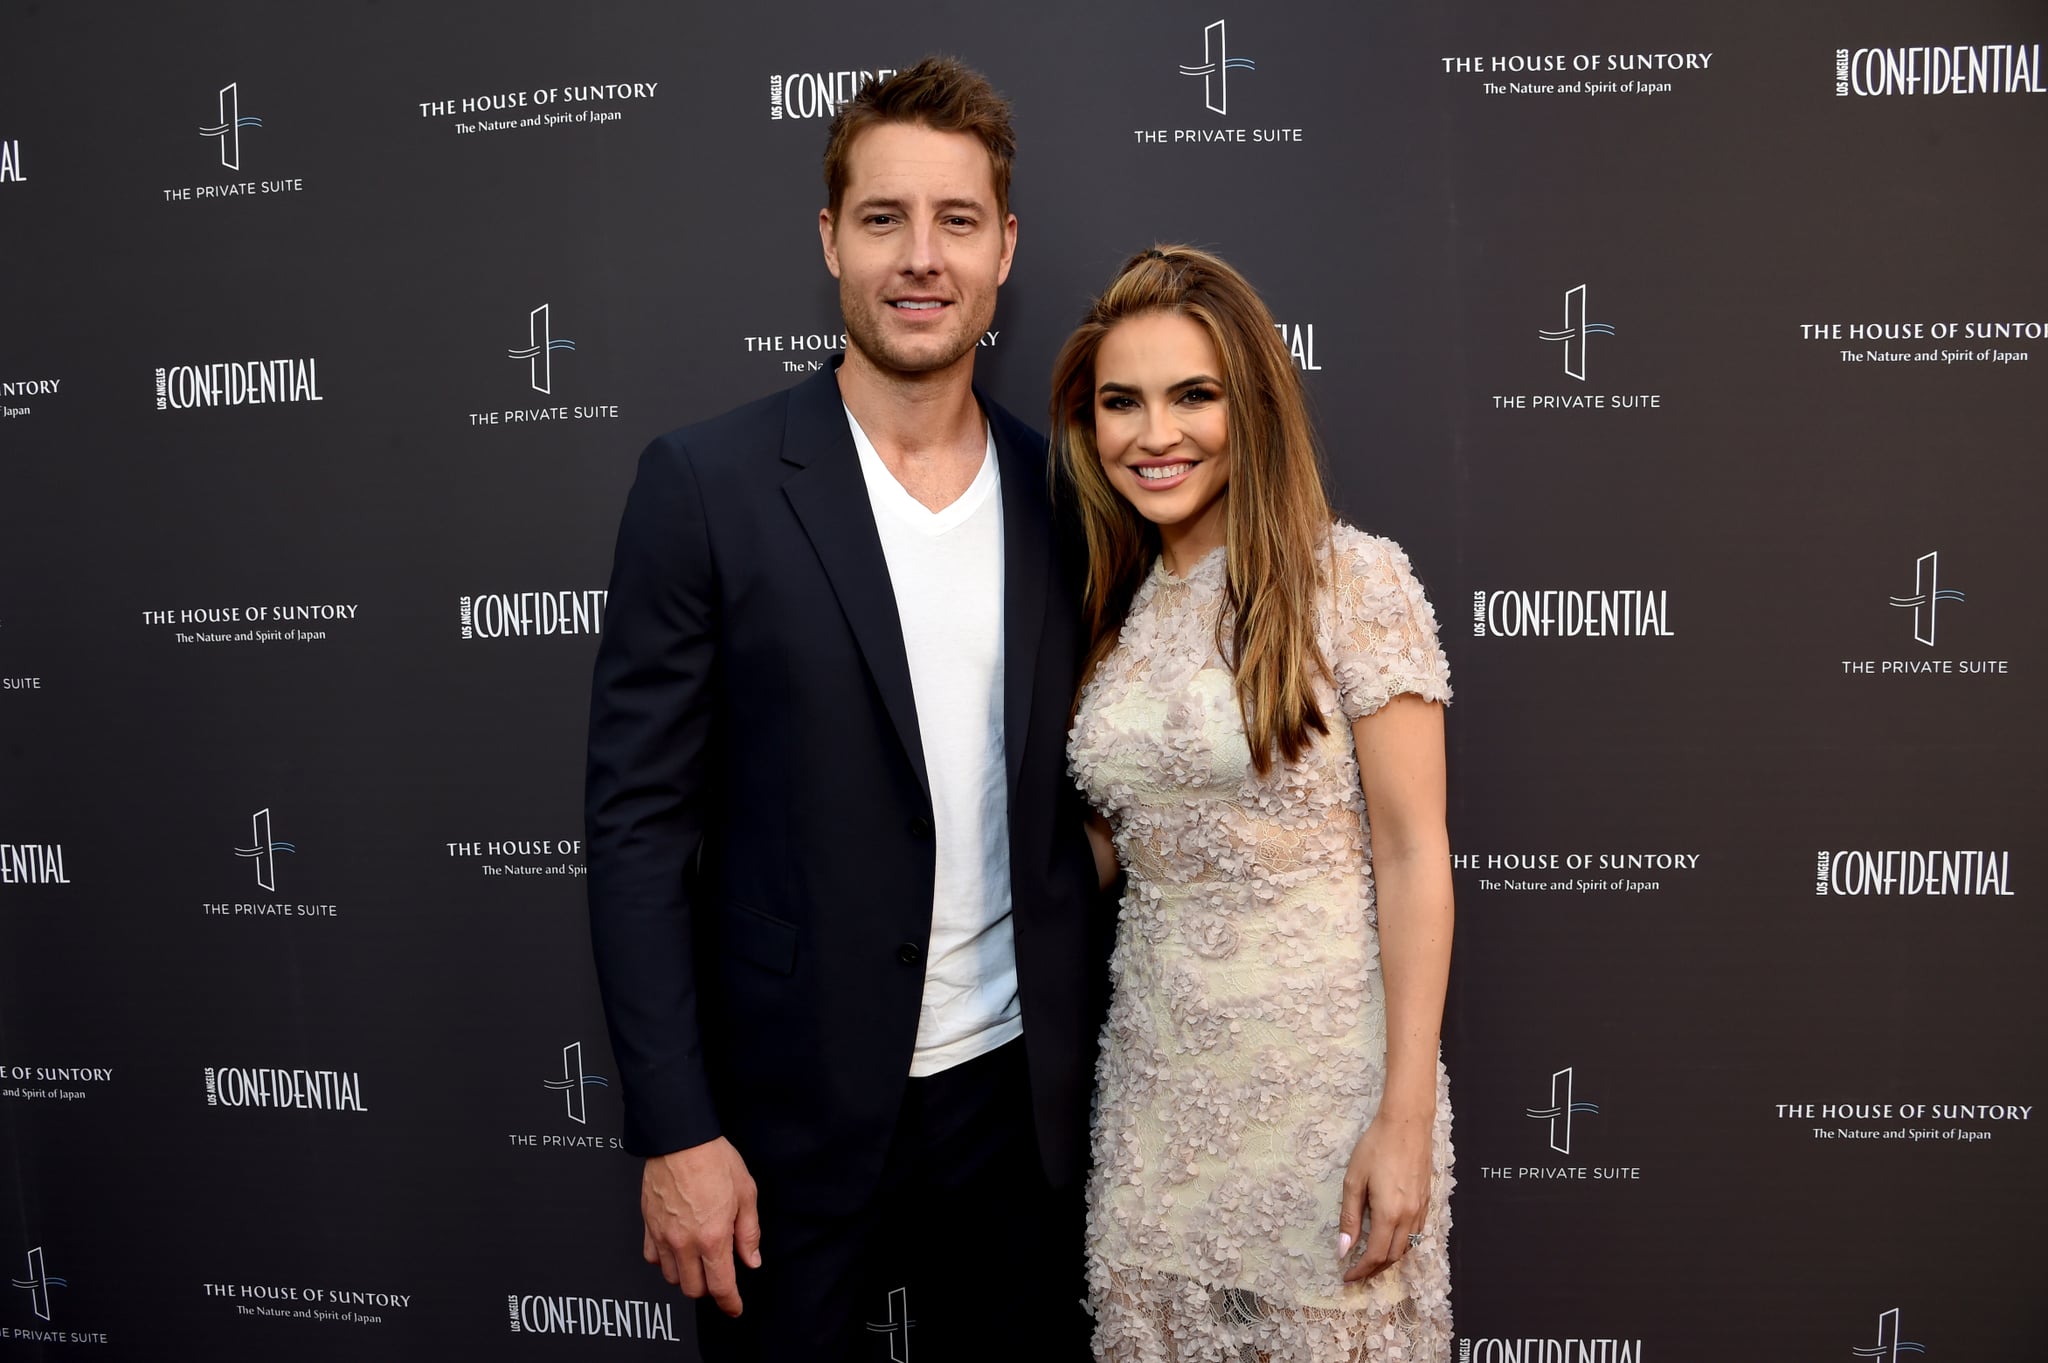 LOS ANGELES, CALIFORNIA - JUNE 09: Justin Hartley and Chrishell Hartley attend the Los Angeles Confidential Impact Awards at The LINE Hotel on June 09, 2019 in Los Angeles, California. (Photo by Michael Kovac/Getty Images for Los Angeles Confidential)